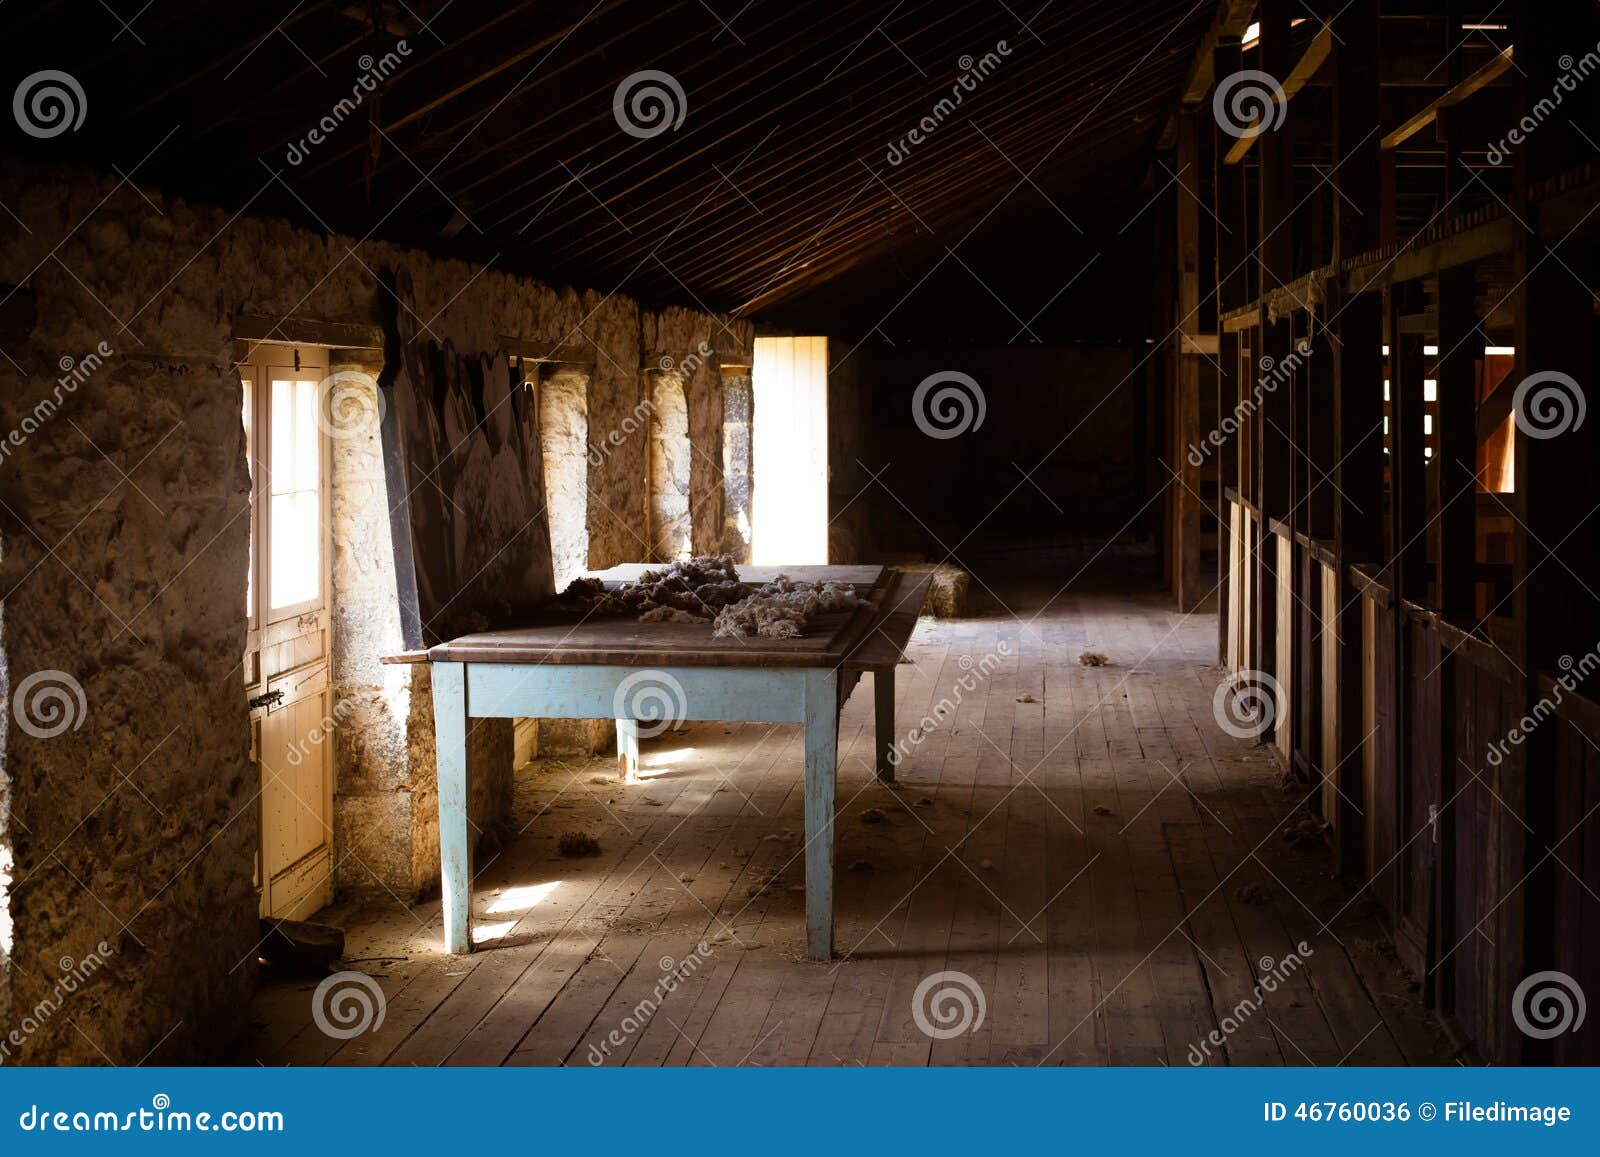 Australian Wool Shed stock photo. Image of melbourne 